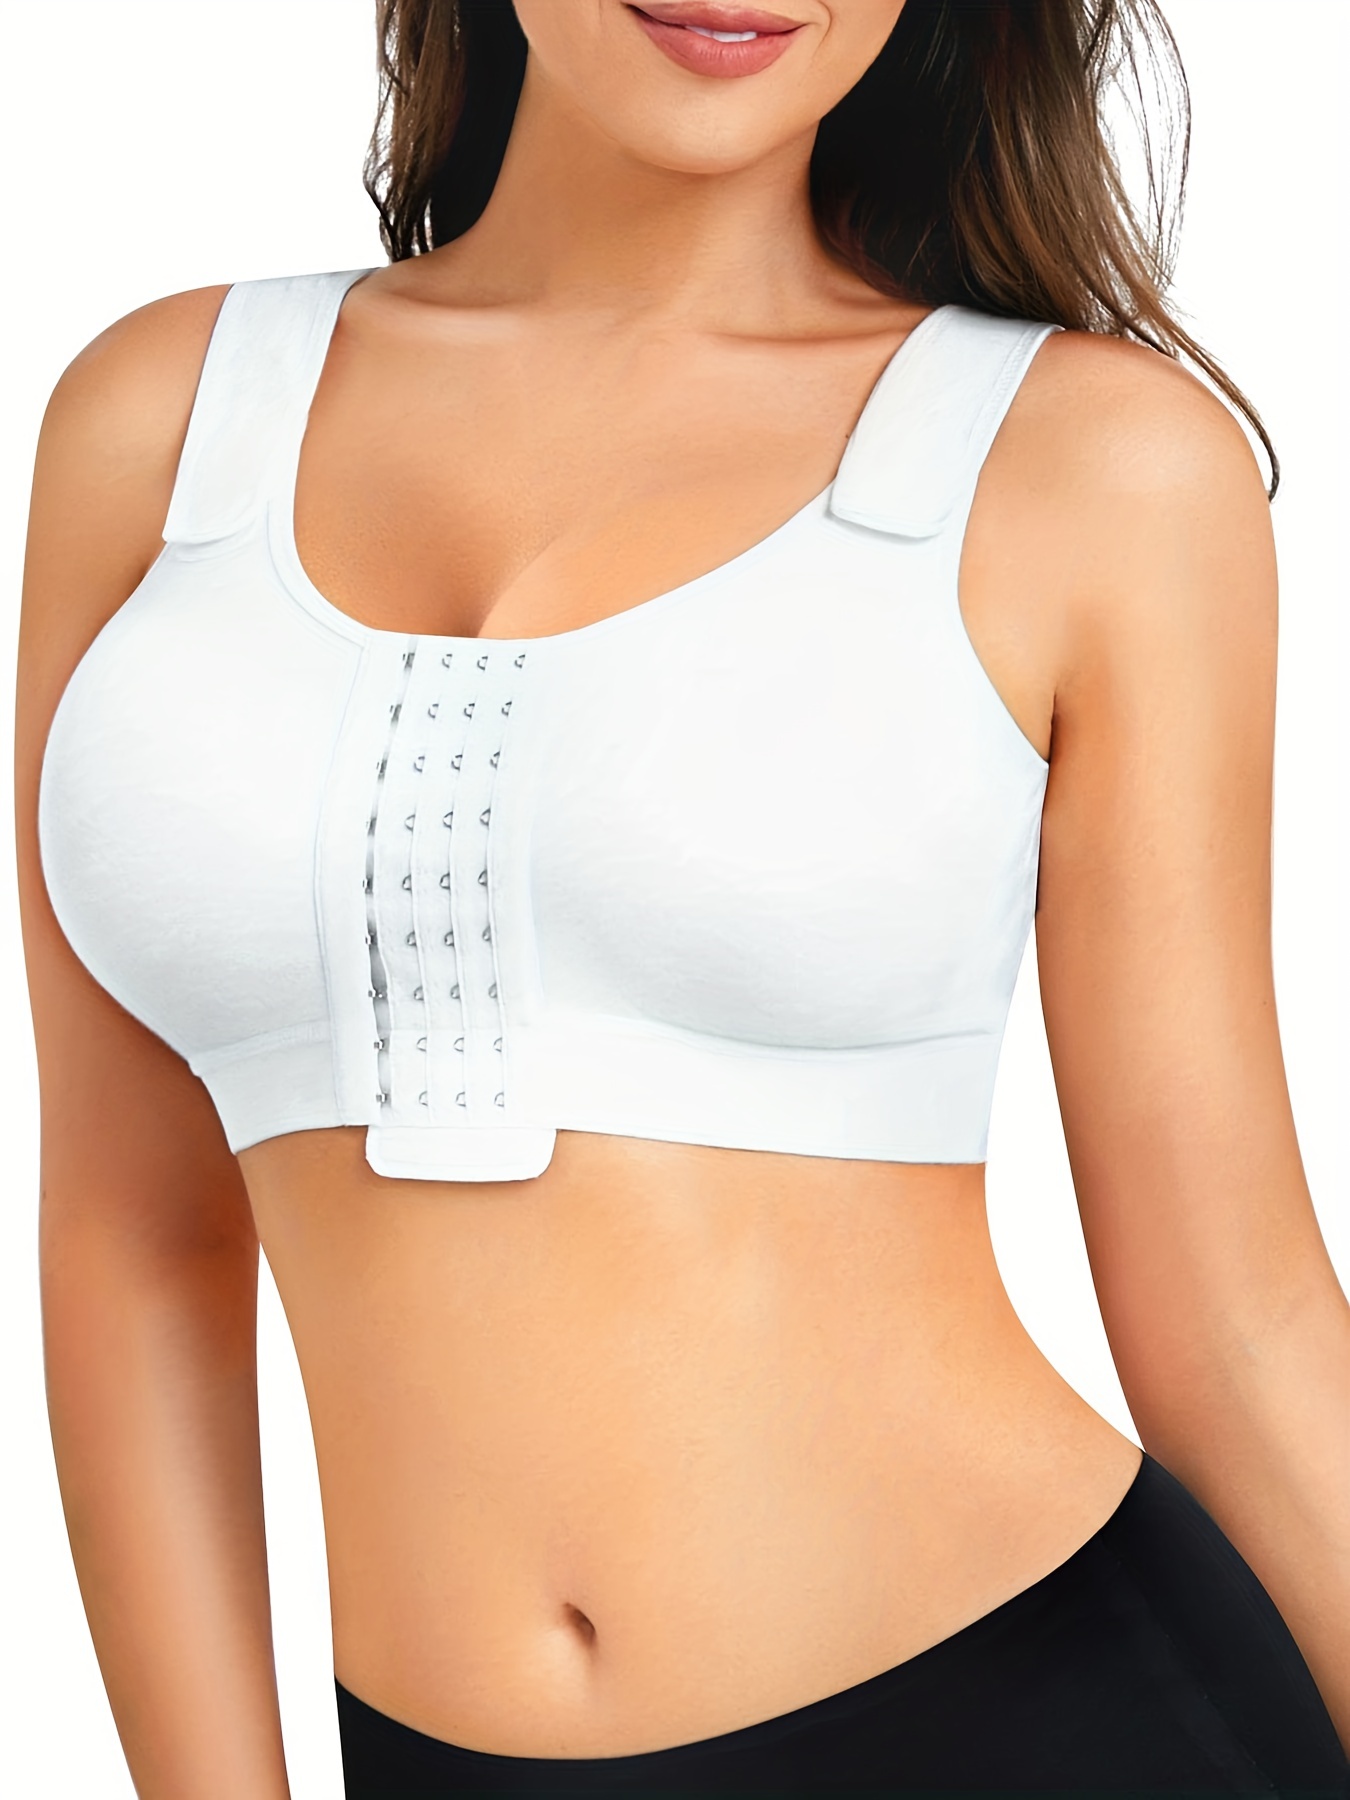 Zip Front Closure Surgical Sports Bra, Post Breast Surgery Mastectomy  Compression Nursing Bra with Removable Pads